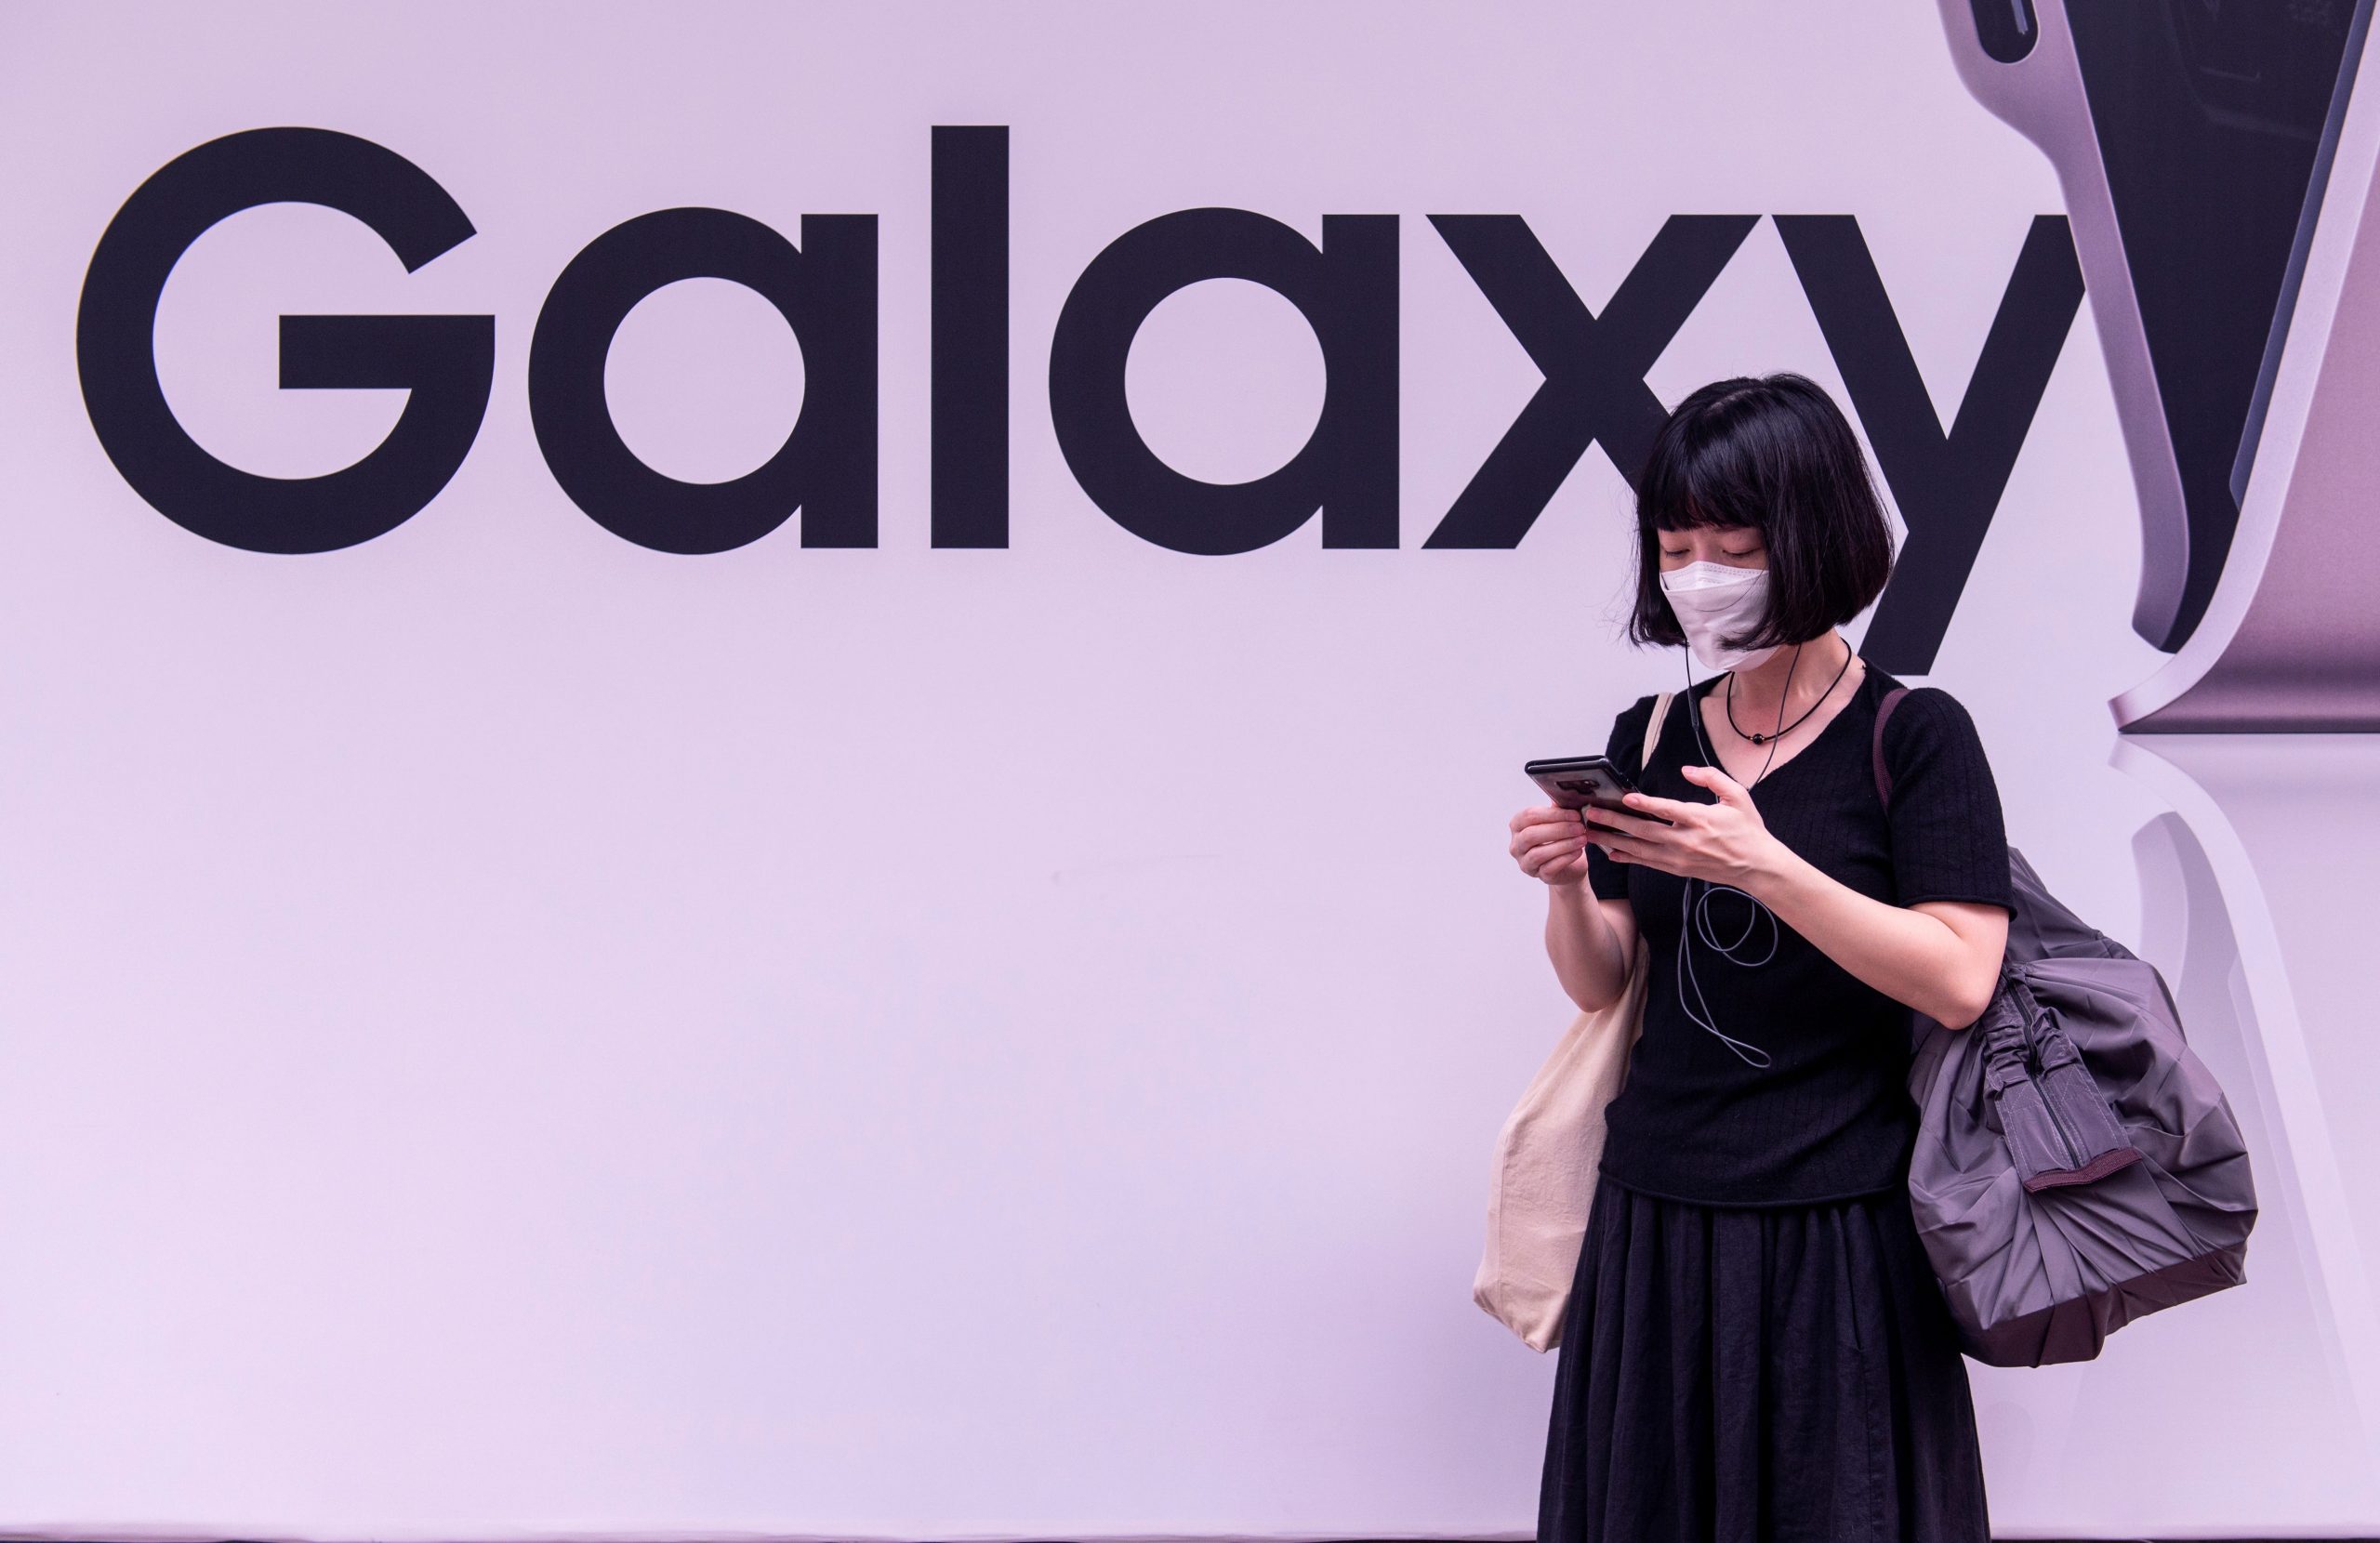 South Korean multinational electronics conglomerate Samsung, advertises the Samsung Galaxy product on a billboard in Hong Kong.